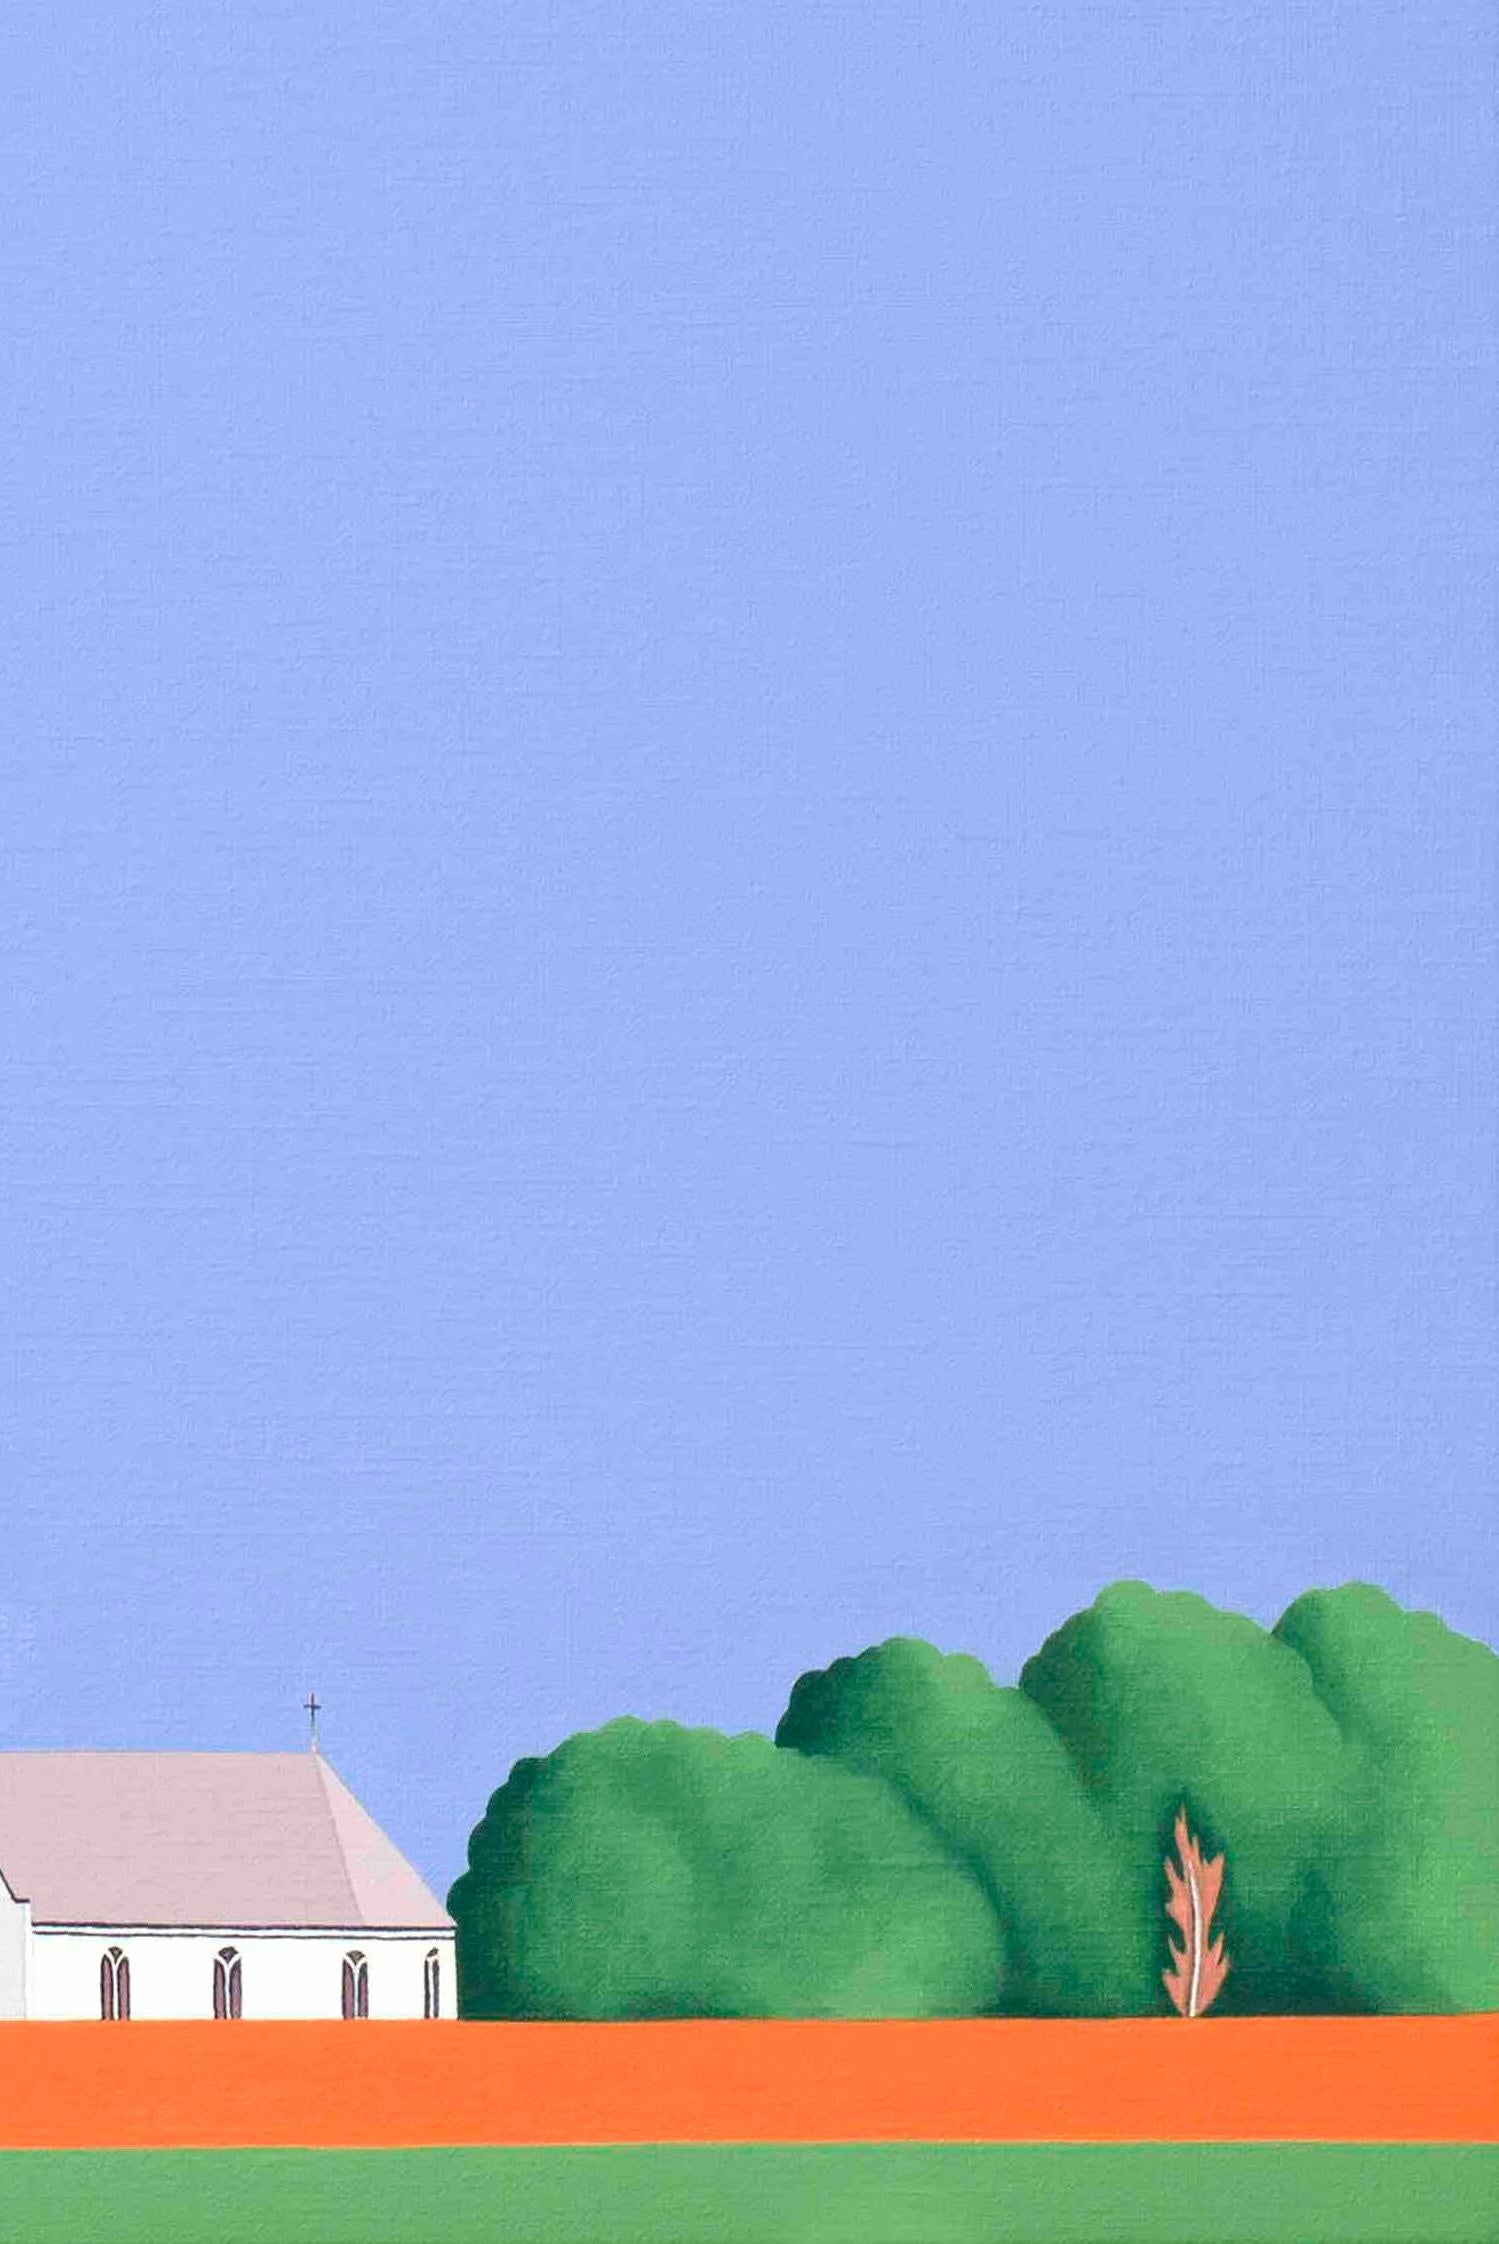 This beautiful painting by Jeroen Allart is part of his minimalist landscape and animal painting he did in his home country the Netherlands.
'A farm stands before you on the horizon. A windmill majestically slices the blue sky. A bird, painted in